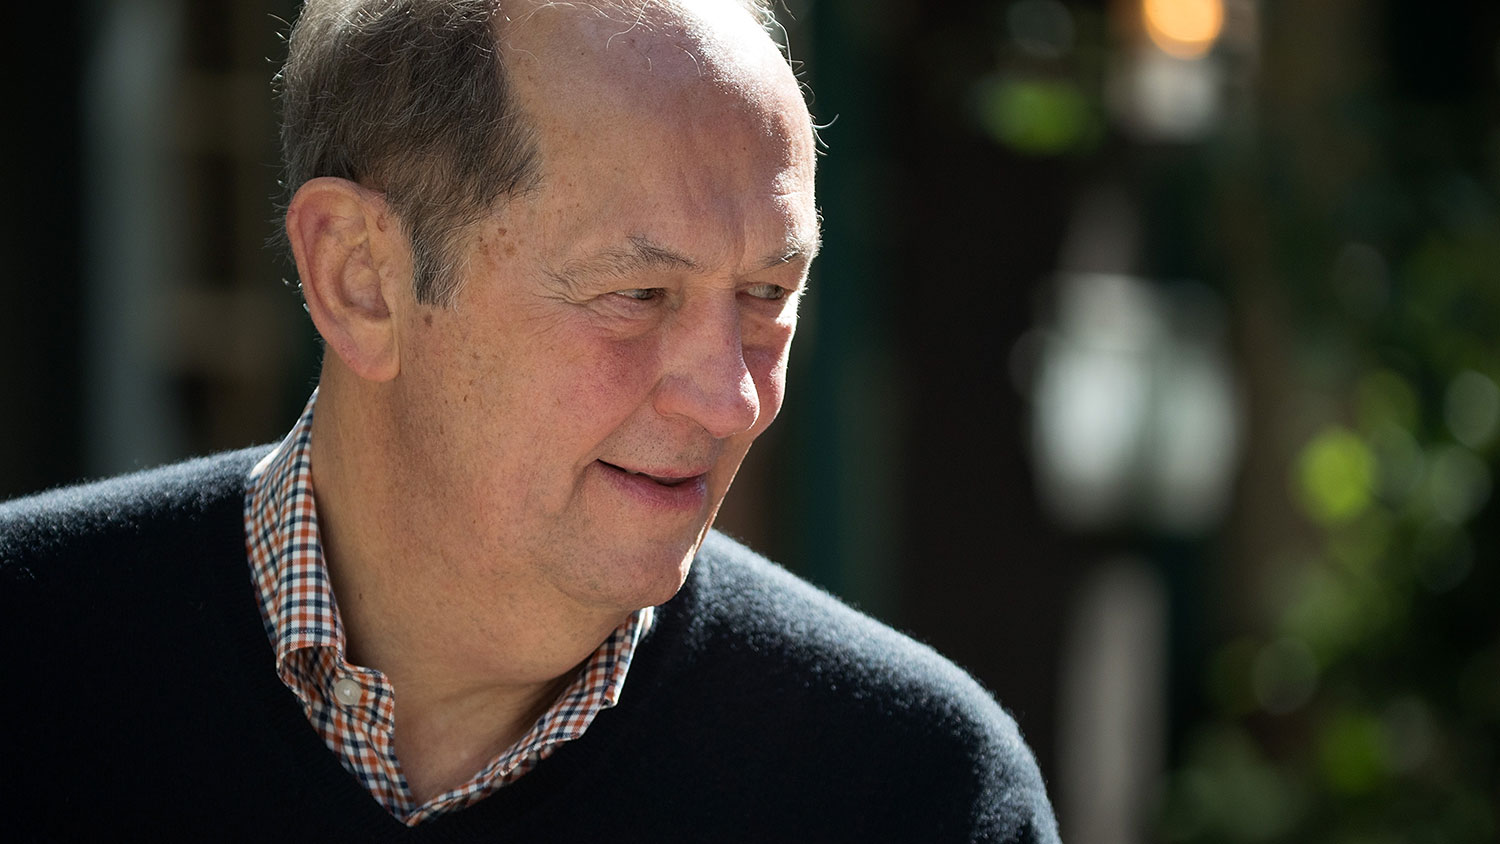 Bill Bradley, former U.S. senator from New Jersey, attends the annual Allen &amp; Company Sun Valley Conference on July 6, 2016, in Sun Valley, Idaho.
